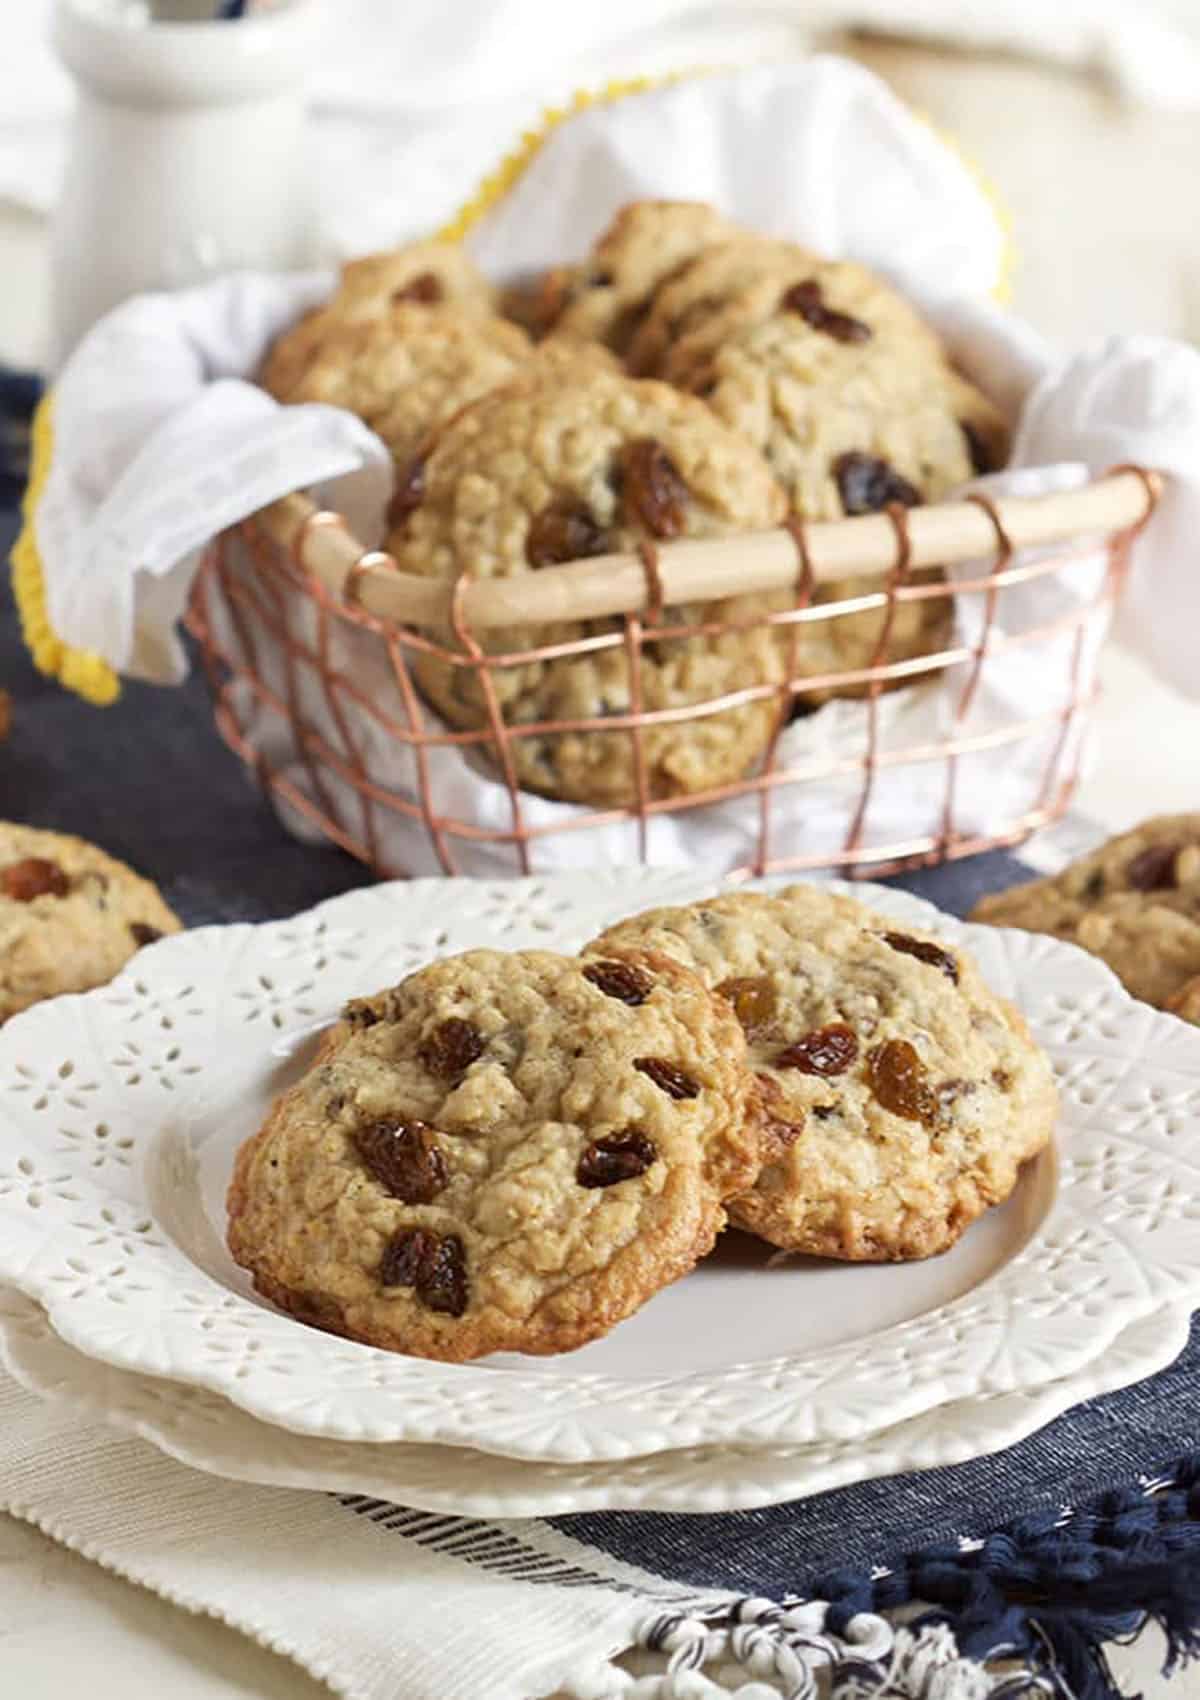 Two oatmeal raisin cookies on a white plate with more cookies in a basket in the background.